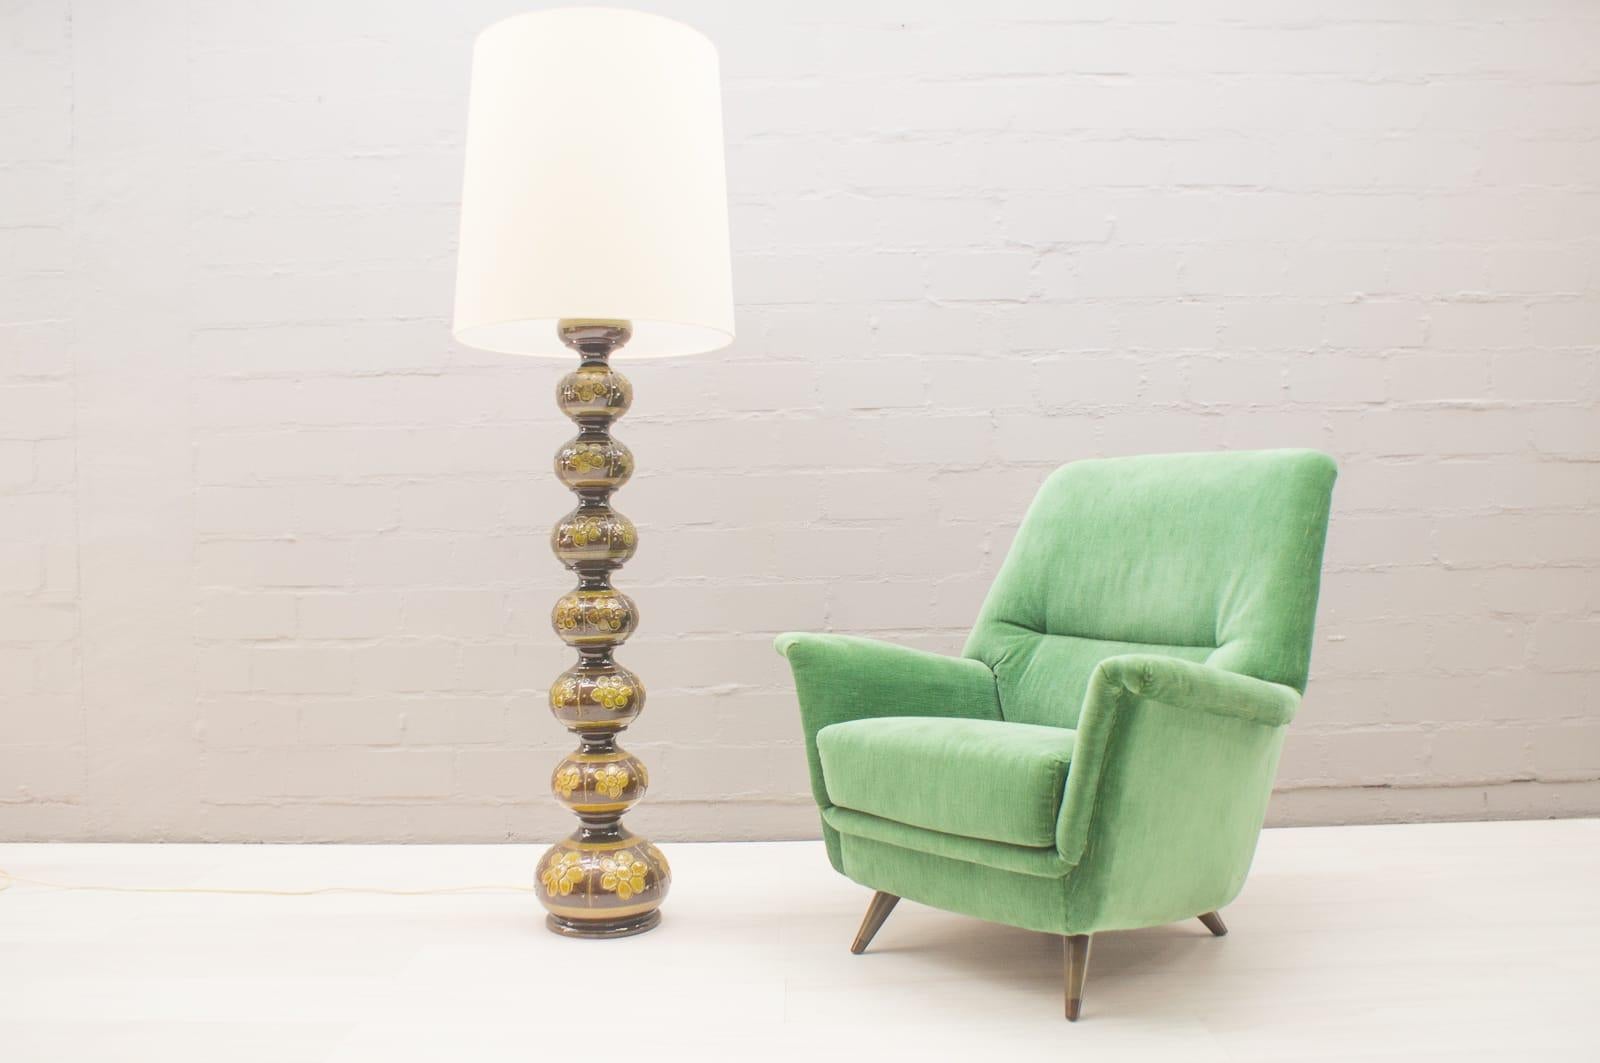 These ceramic floor lamps were designed in the 1960s. 
The skylight and the two inner lights can be turned on separately. 
We have had the lampshades reupholstered.
We have two more floor lamps and several table lamps from Kaiser Leuchten.